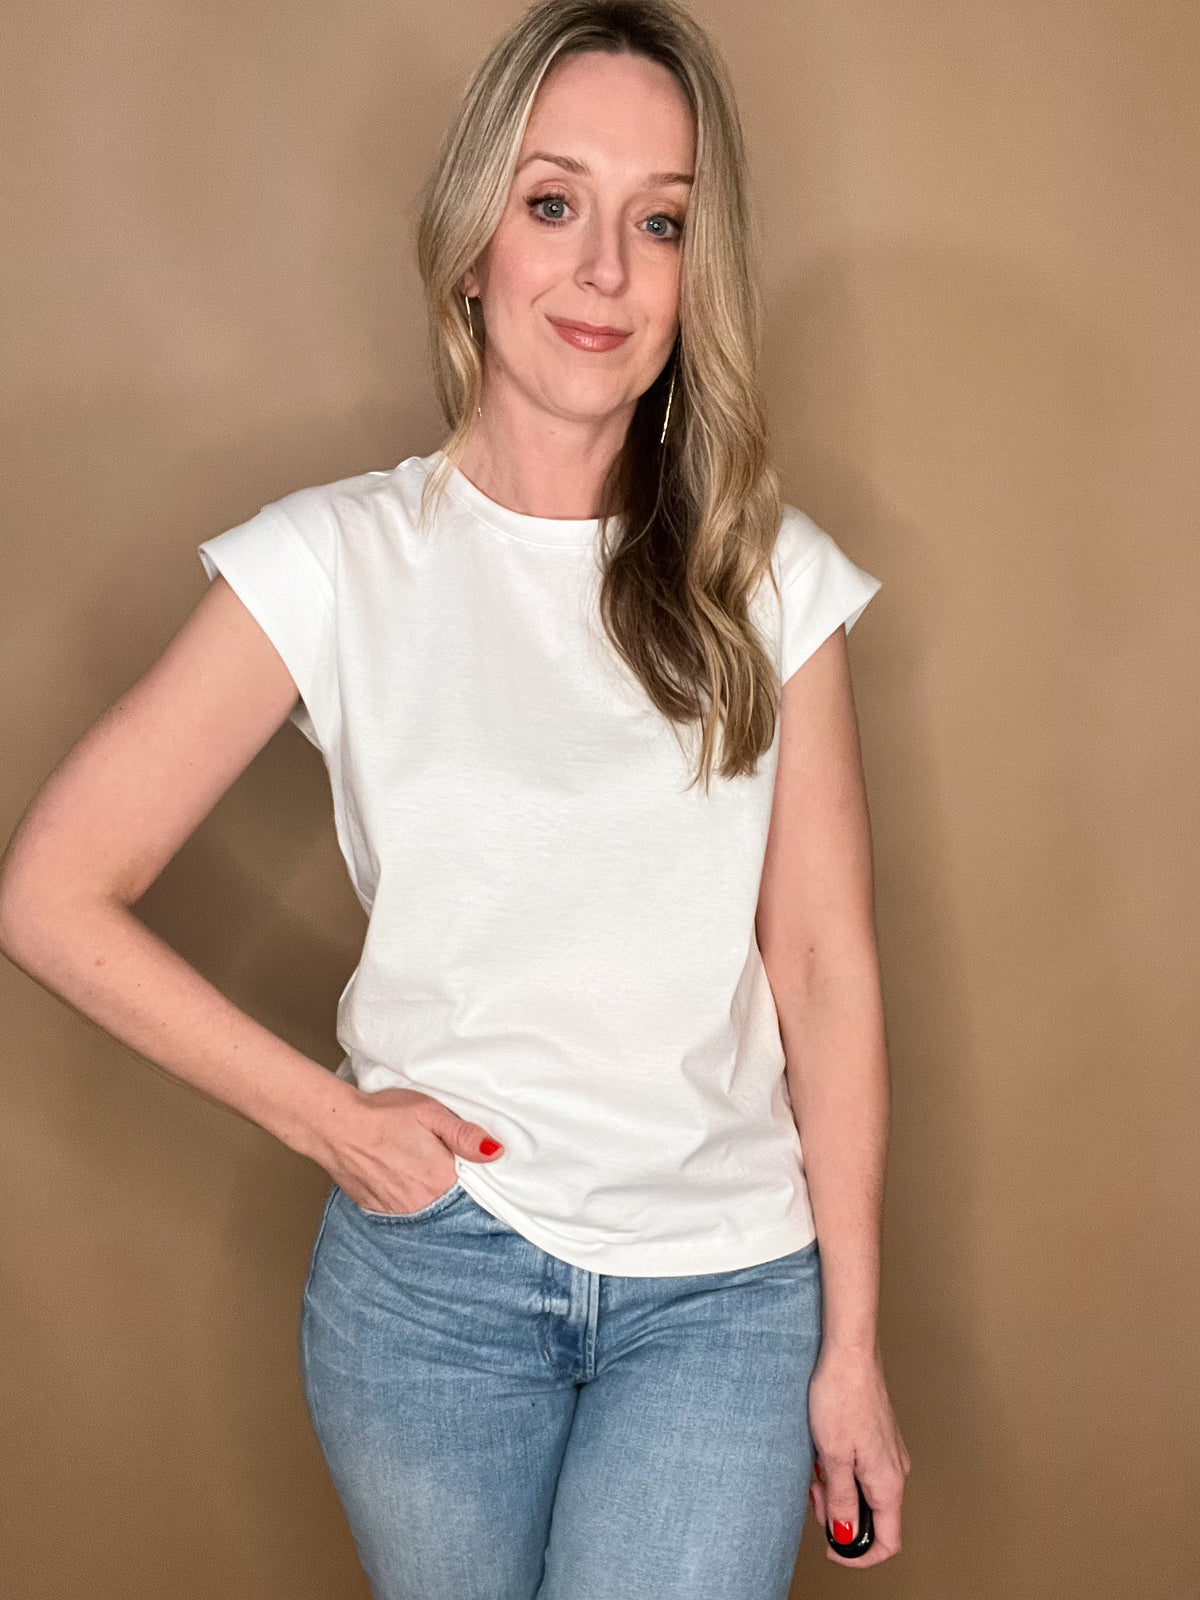 Elevate your wardrobe with our White Shoulder Detail Tee! This closet staple is made from 100% cotton, offering both comfort and style. The shoulder detailing adds a unique touch to this classic white tee. Perfect for layering or pairing with denim cut offs for a timeless warm weather look.